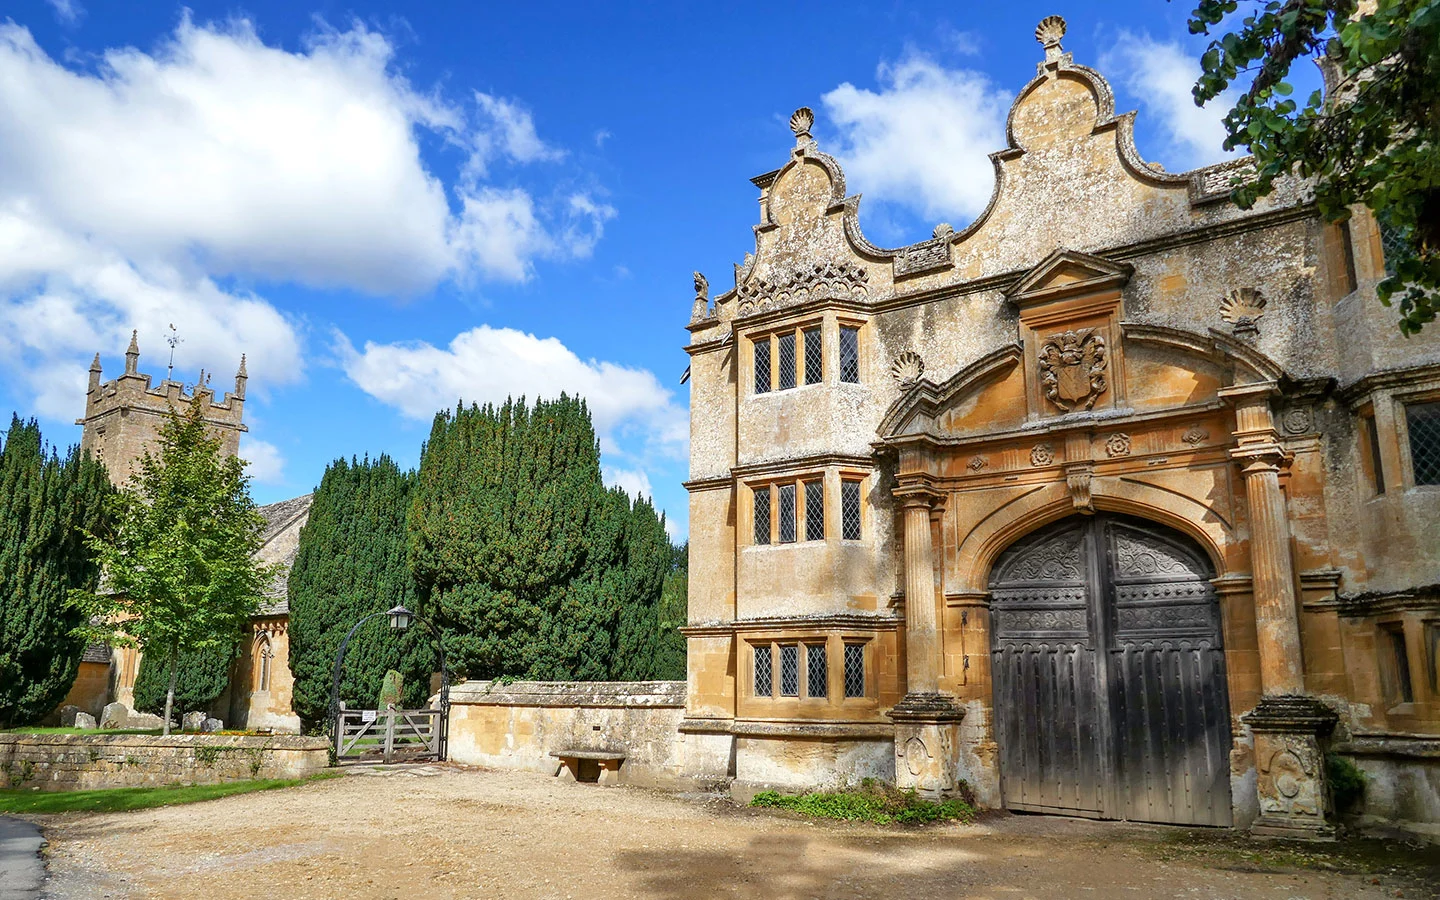 The entrance to Stanway House, a popular Cotswolds film location